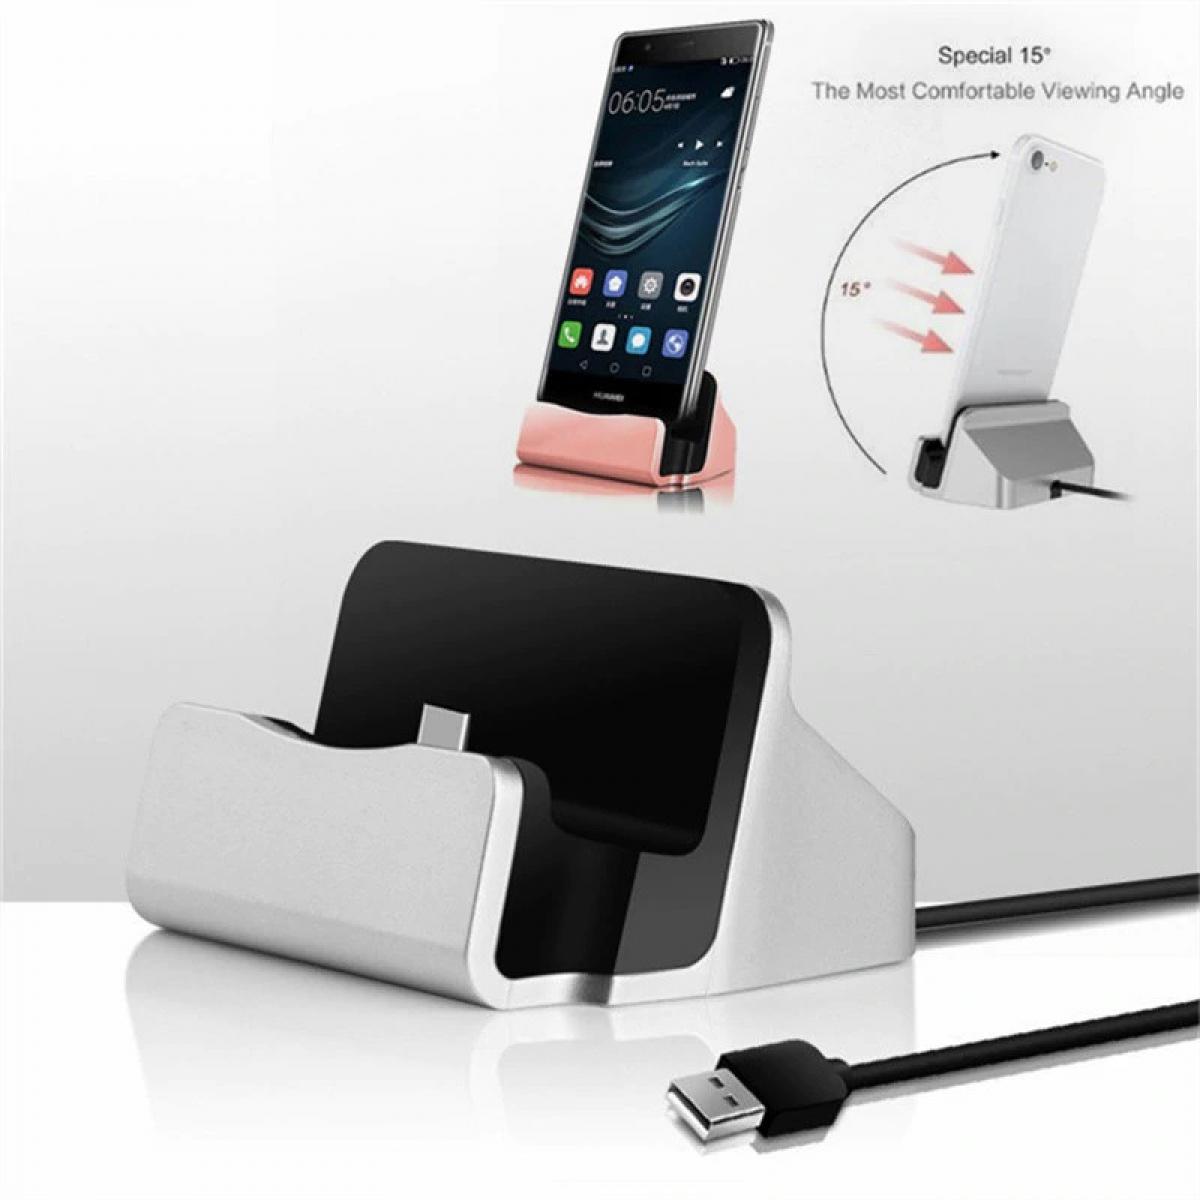 Shot - Station d'Accueil de Chargement pour SONY Xperia XA Smartphone Micro USB Support Chargeur Bureau (ROSE) - Station d'accueil smartphone